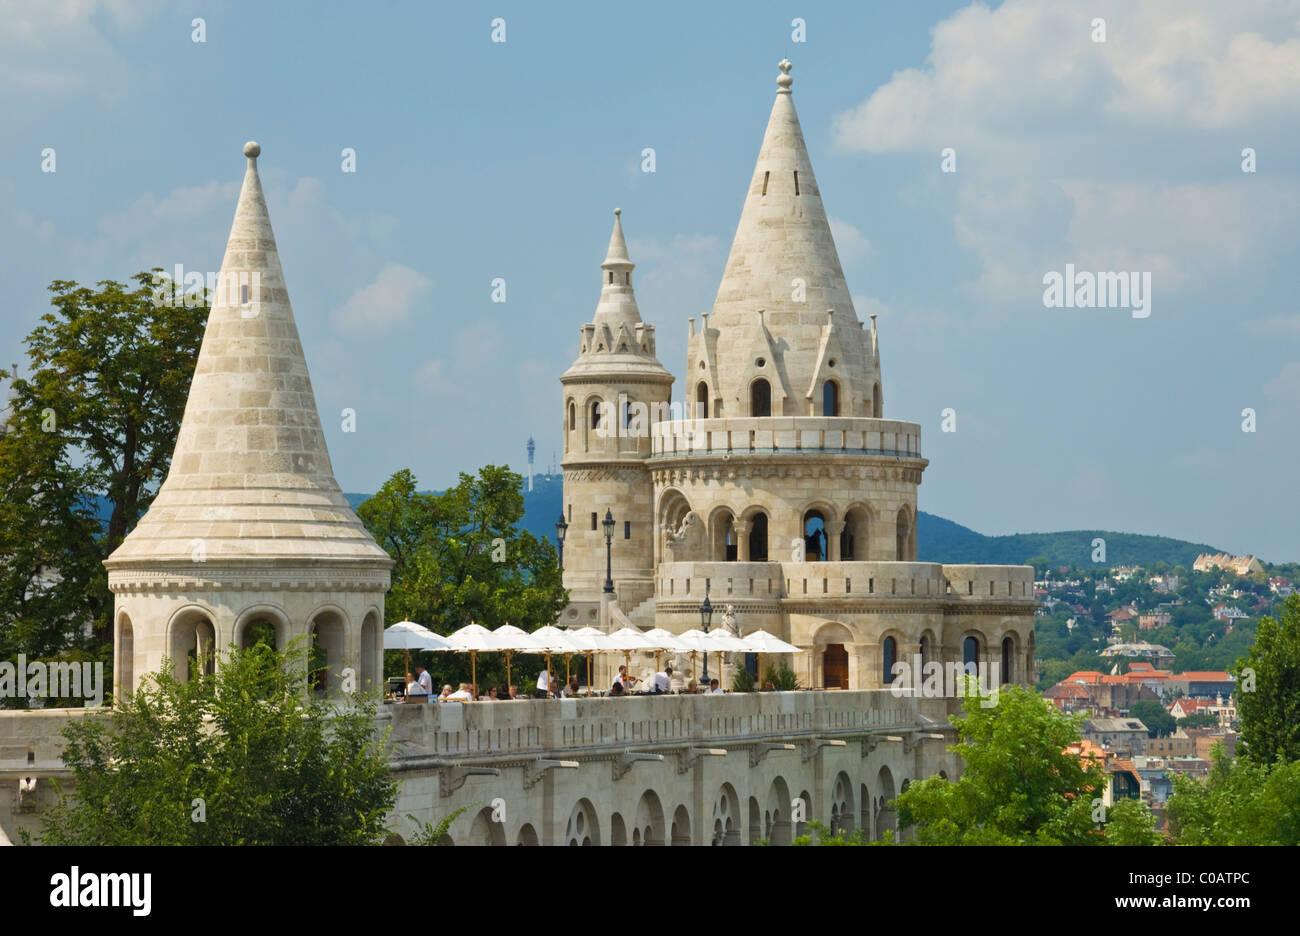 Arches of the Fishermen's Bastion with a cafe restaurant Budapest, Hungary, Europe, EU Stock Photo